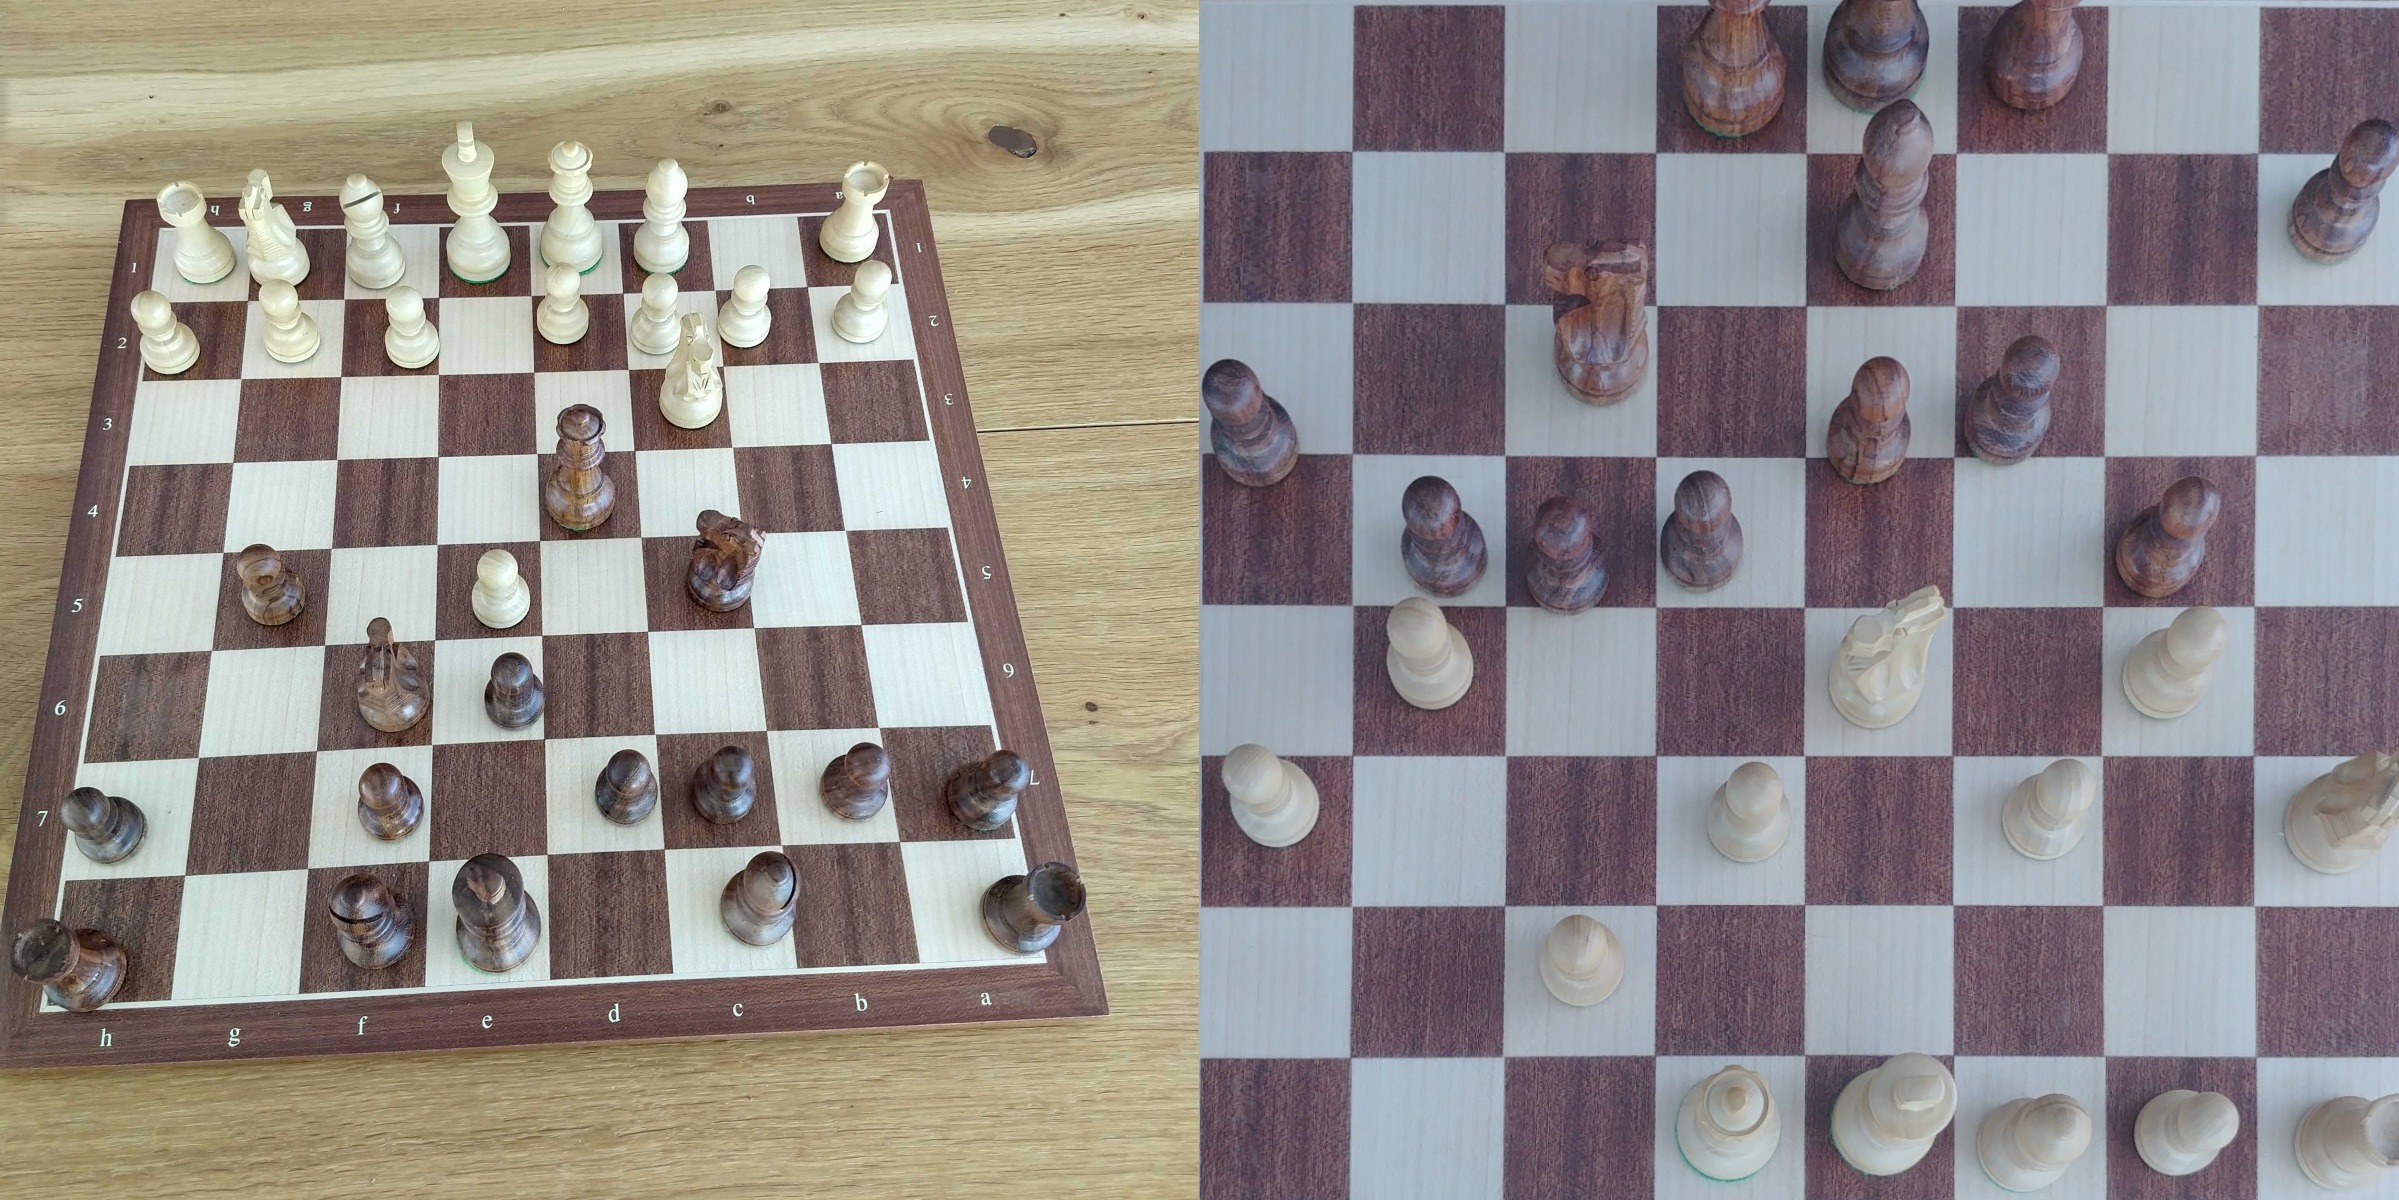 Chessboard with Python